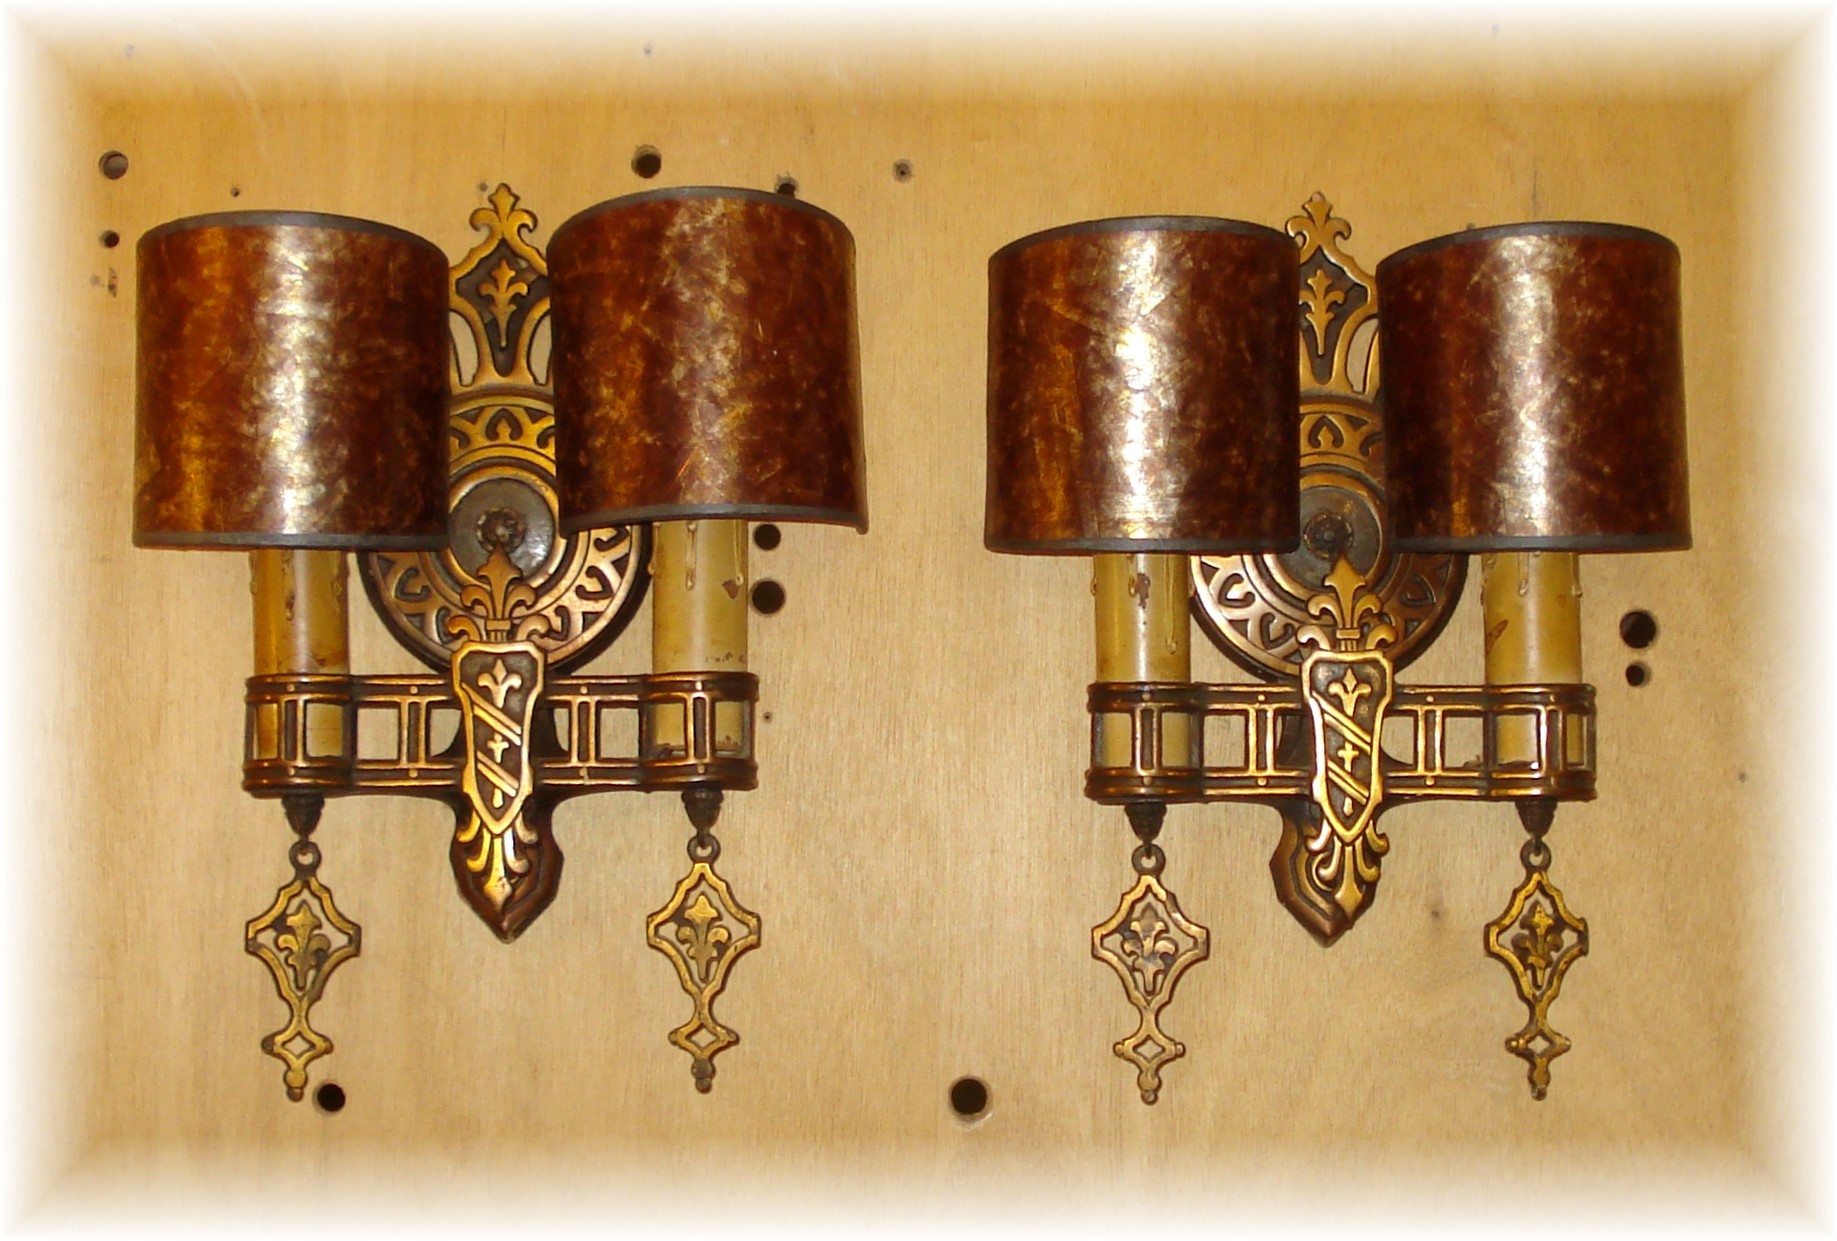 Copper wash sconces with mica shades